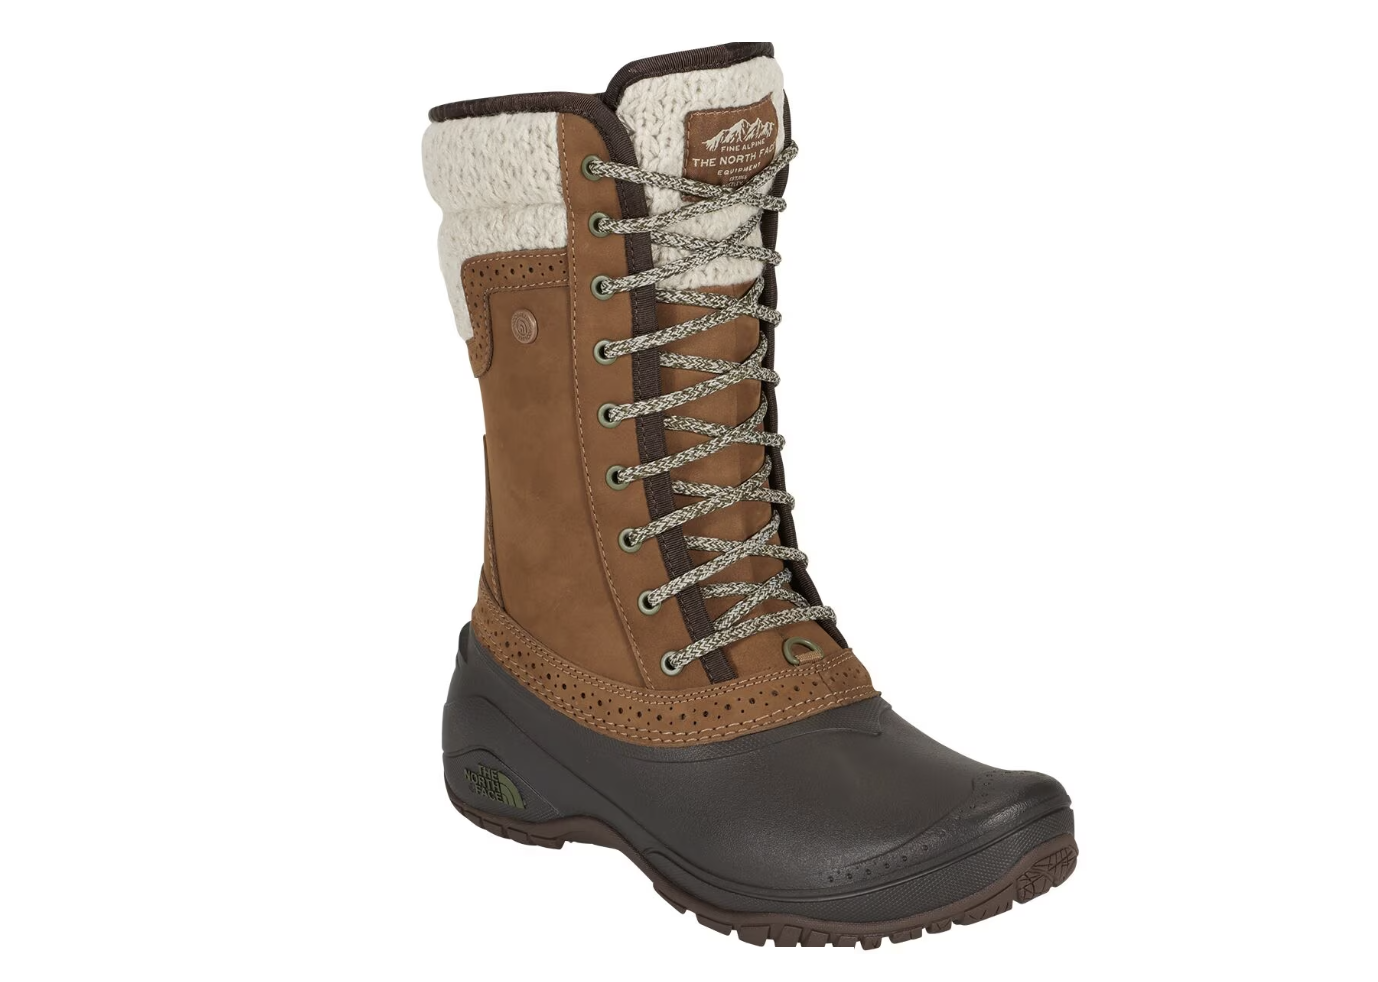 North Face Women's Boot